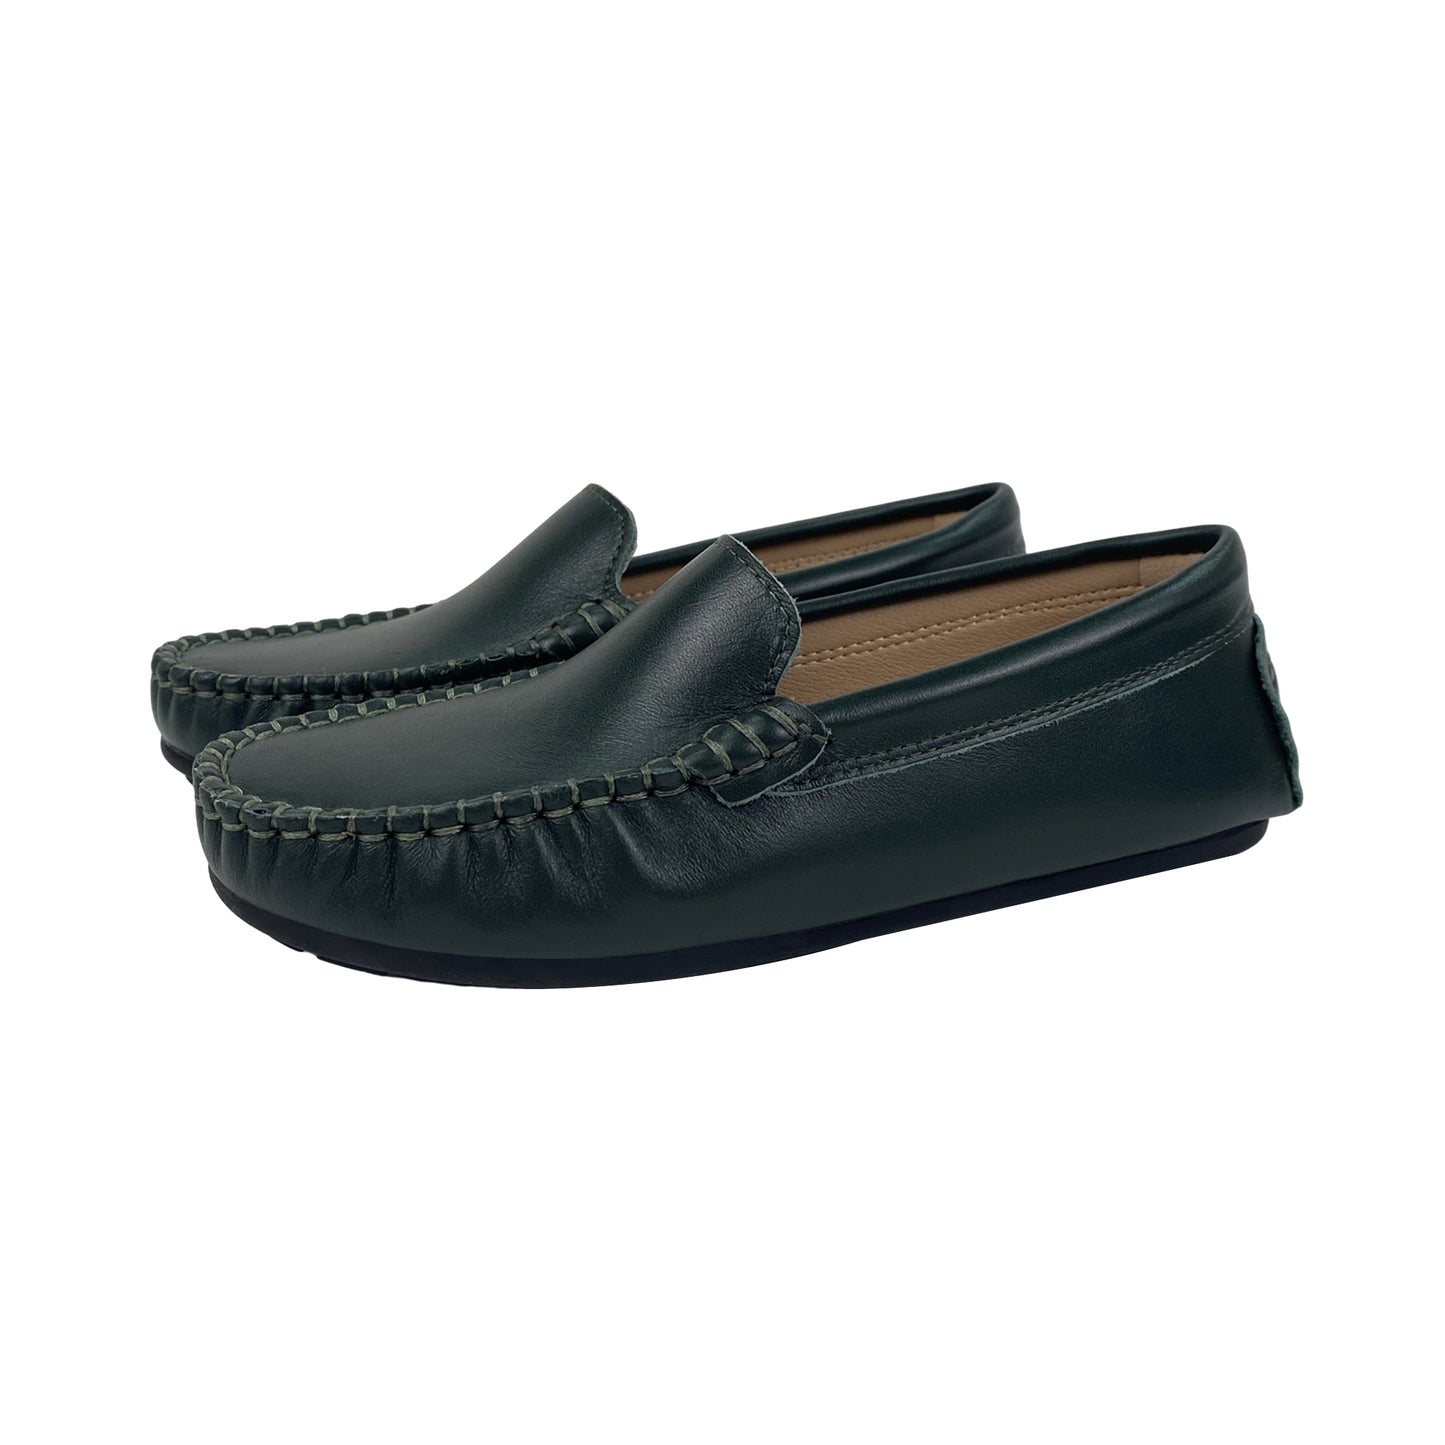 New Perroquet Navy Loafers